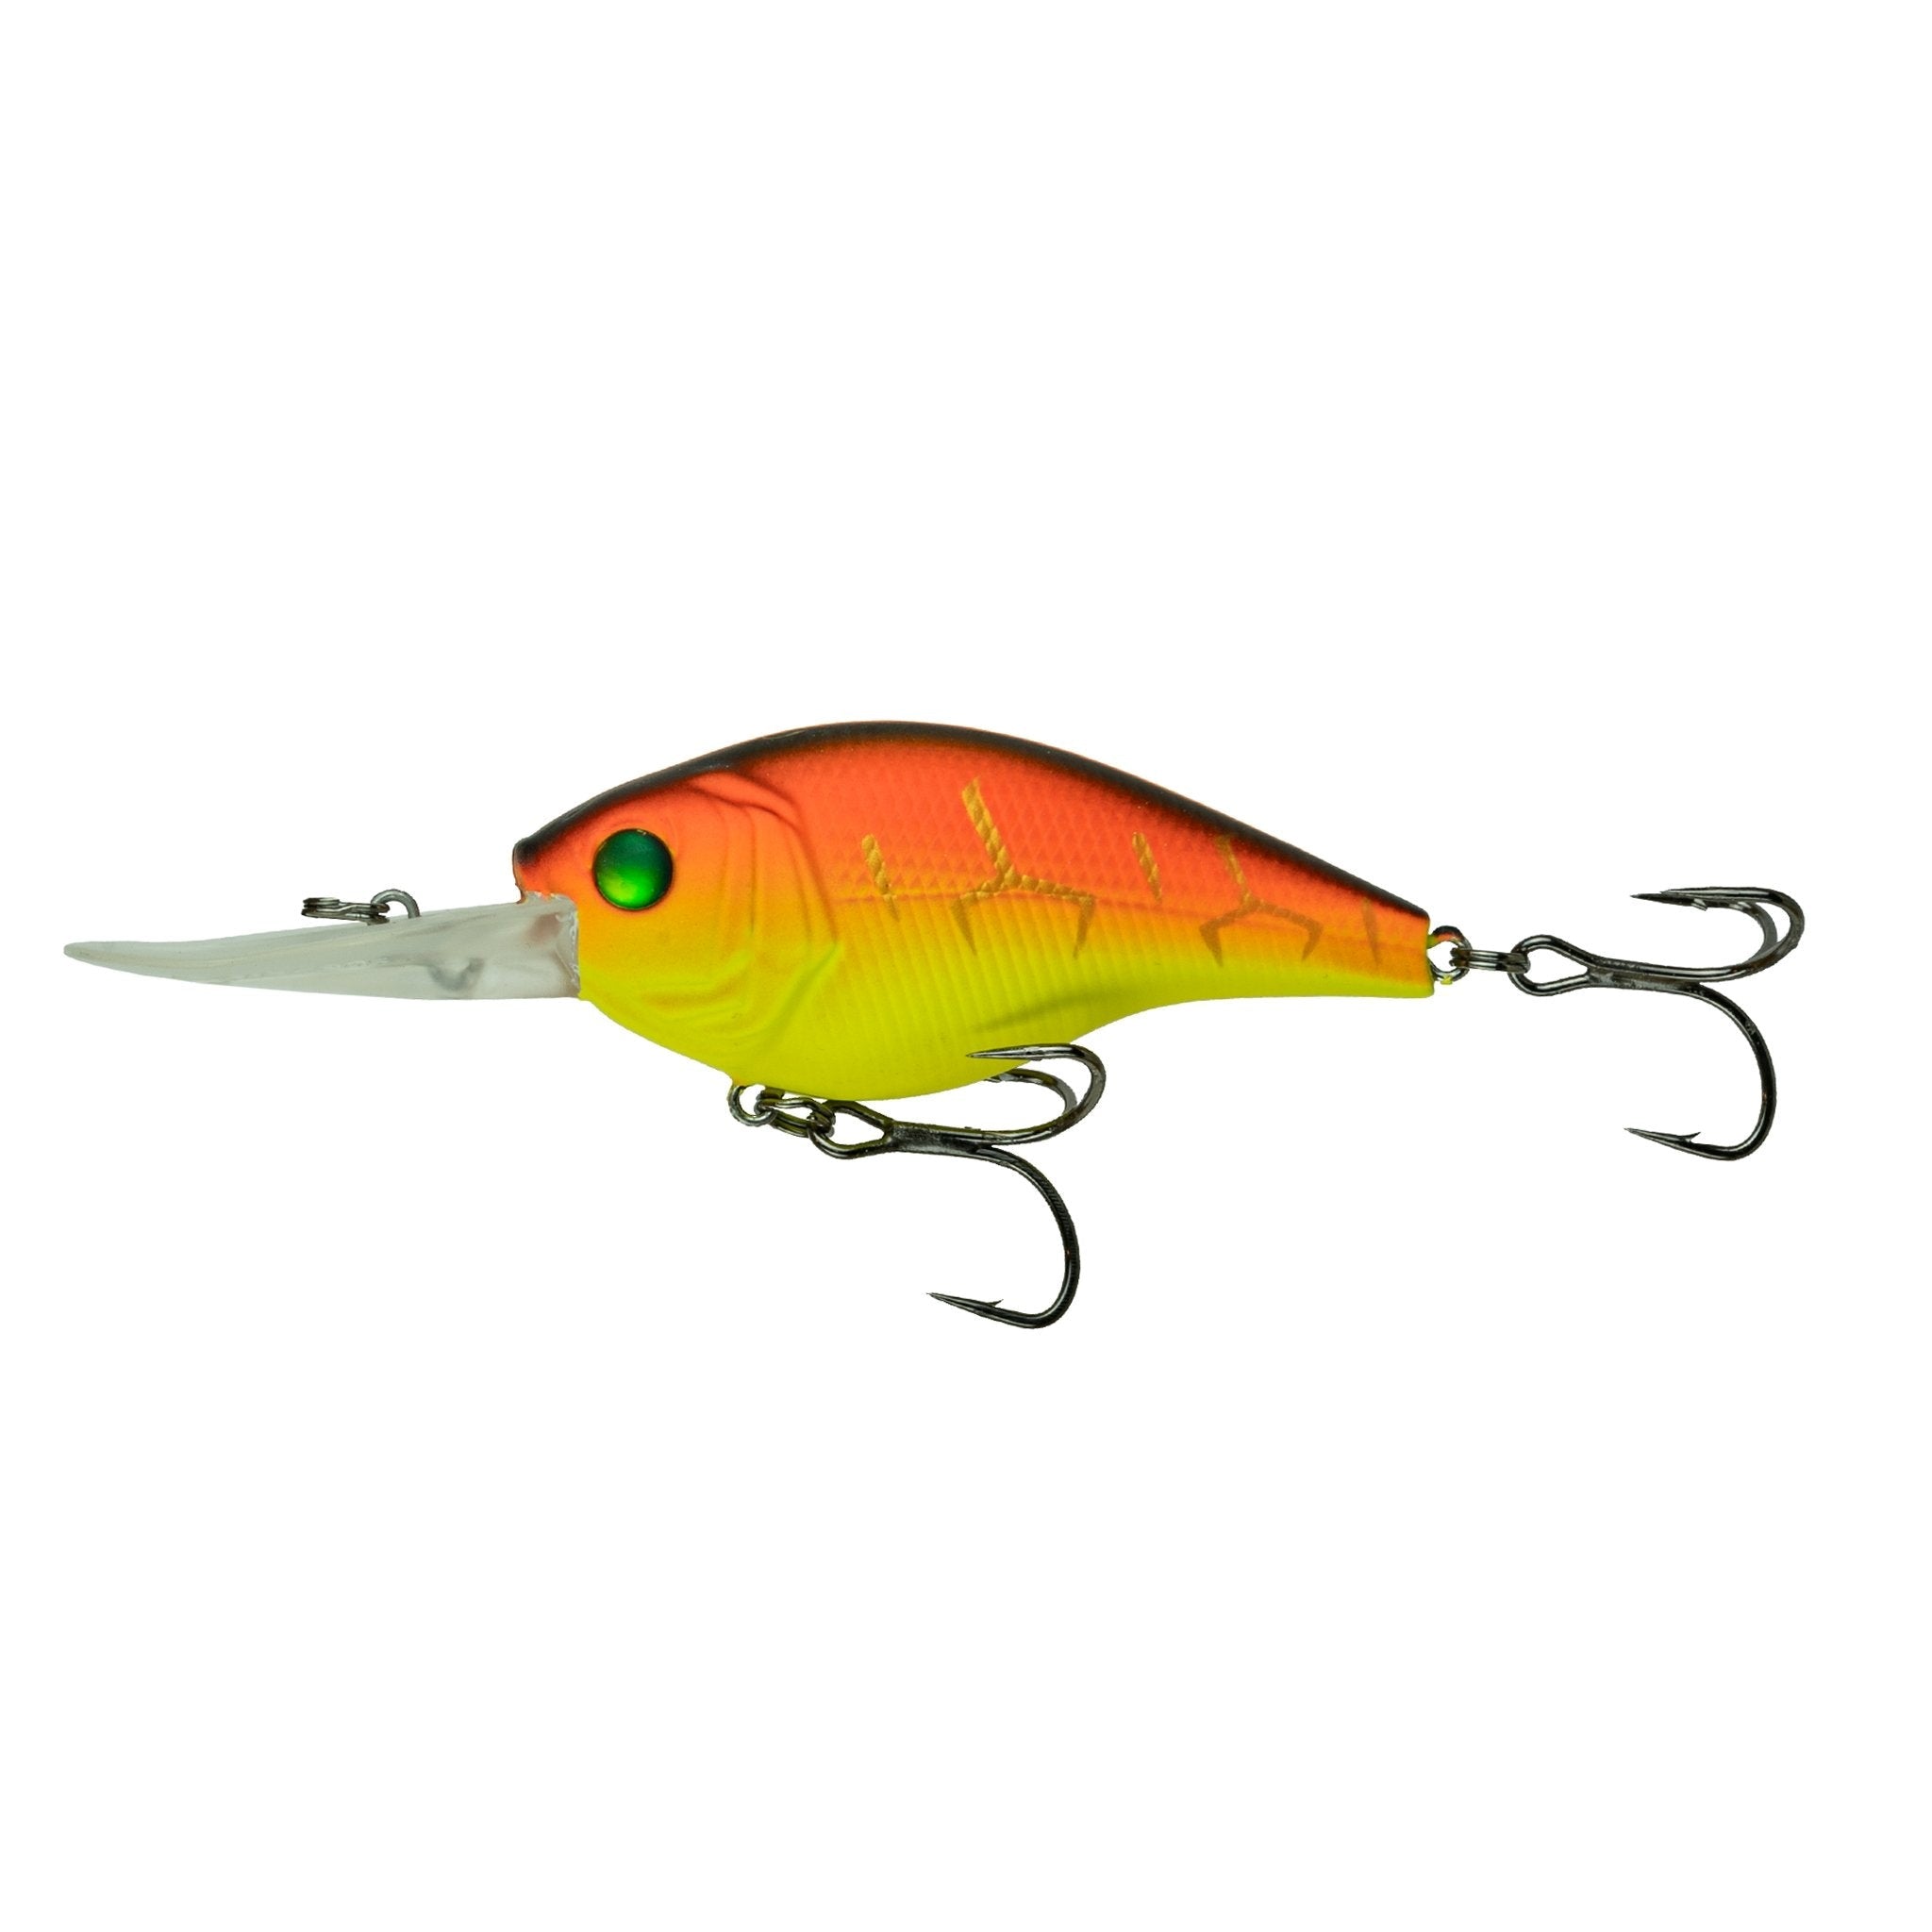 Buy Fishing Material Online, Fishing Supplies Online